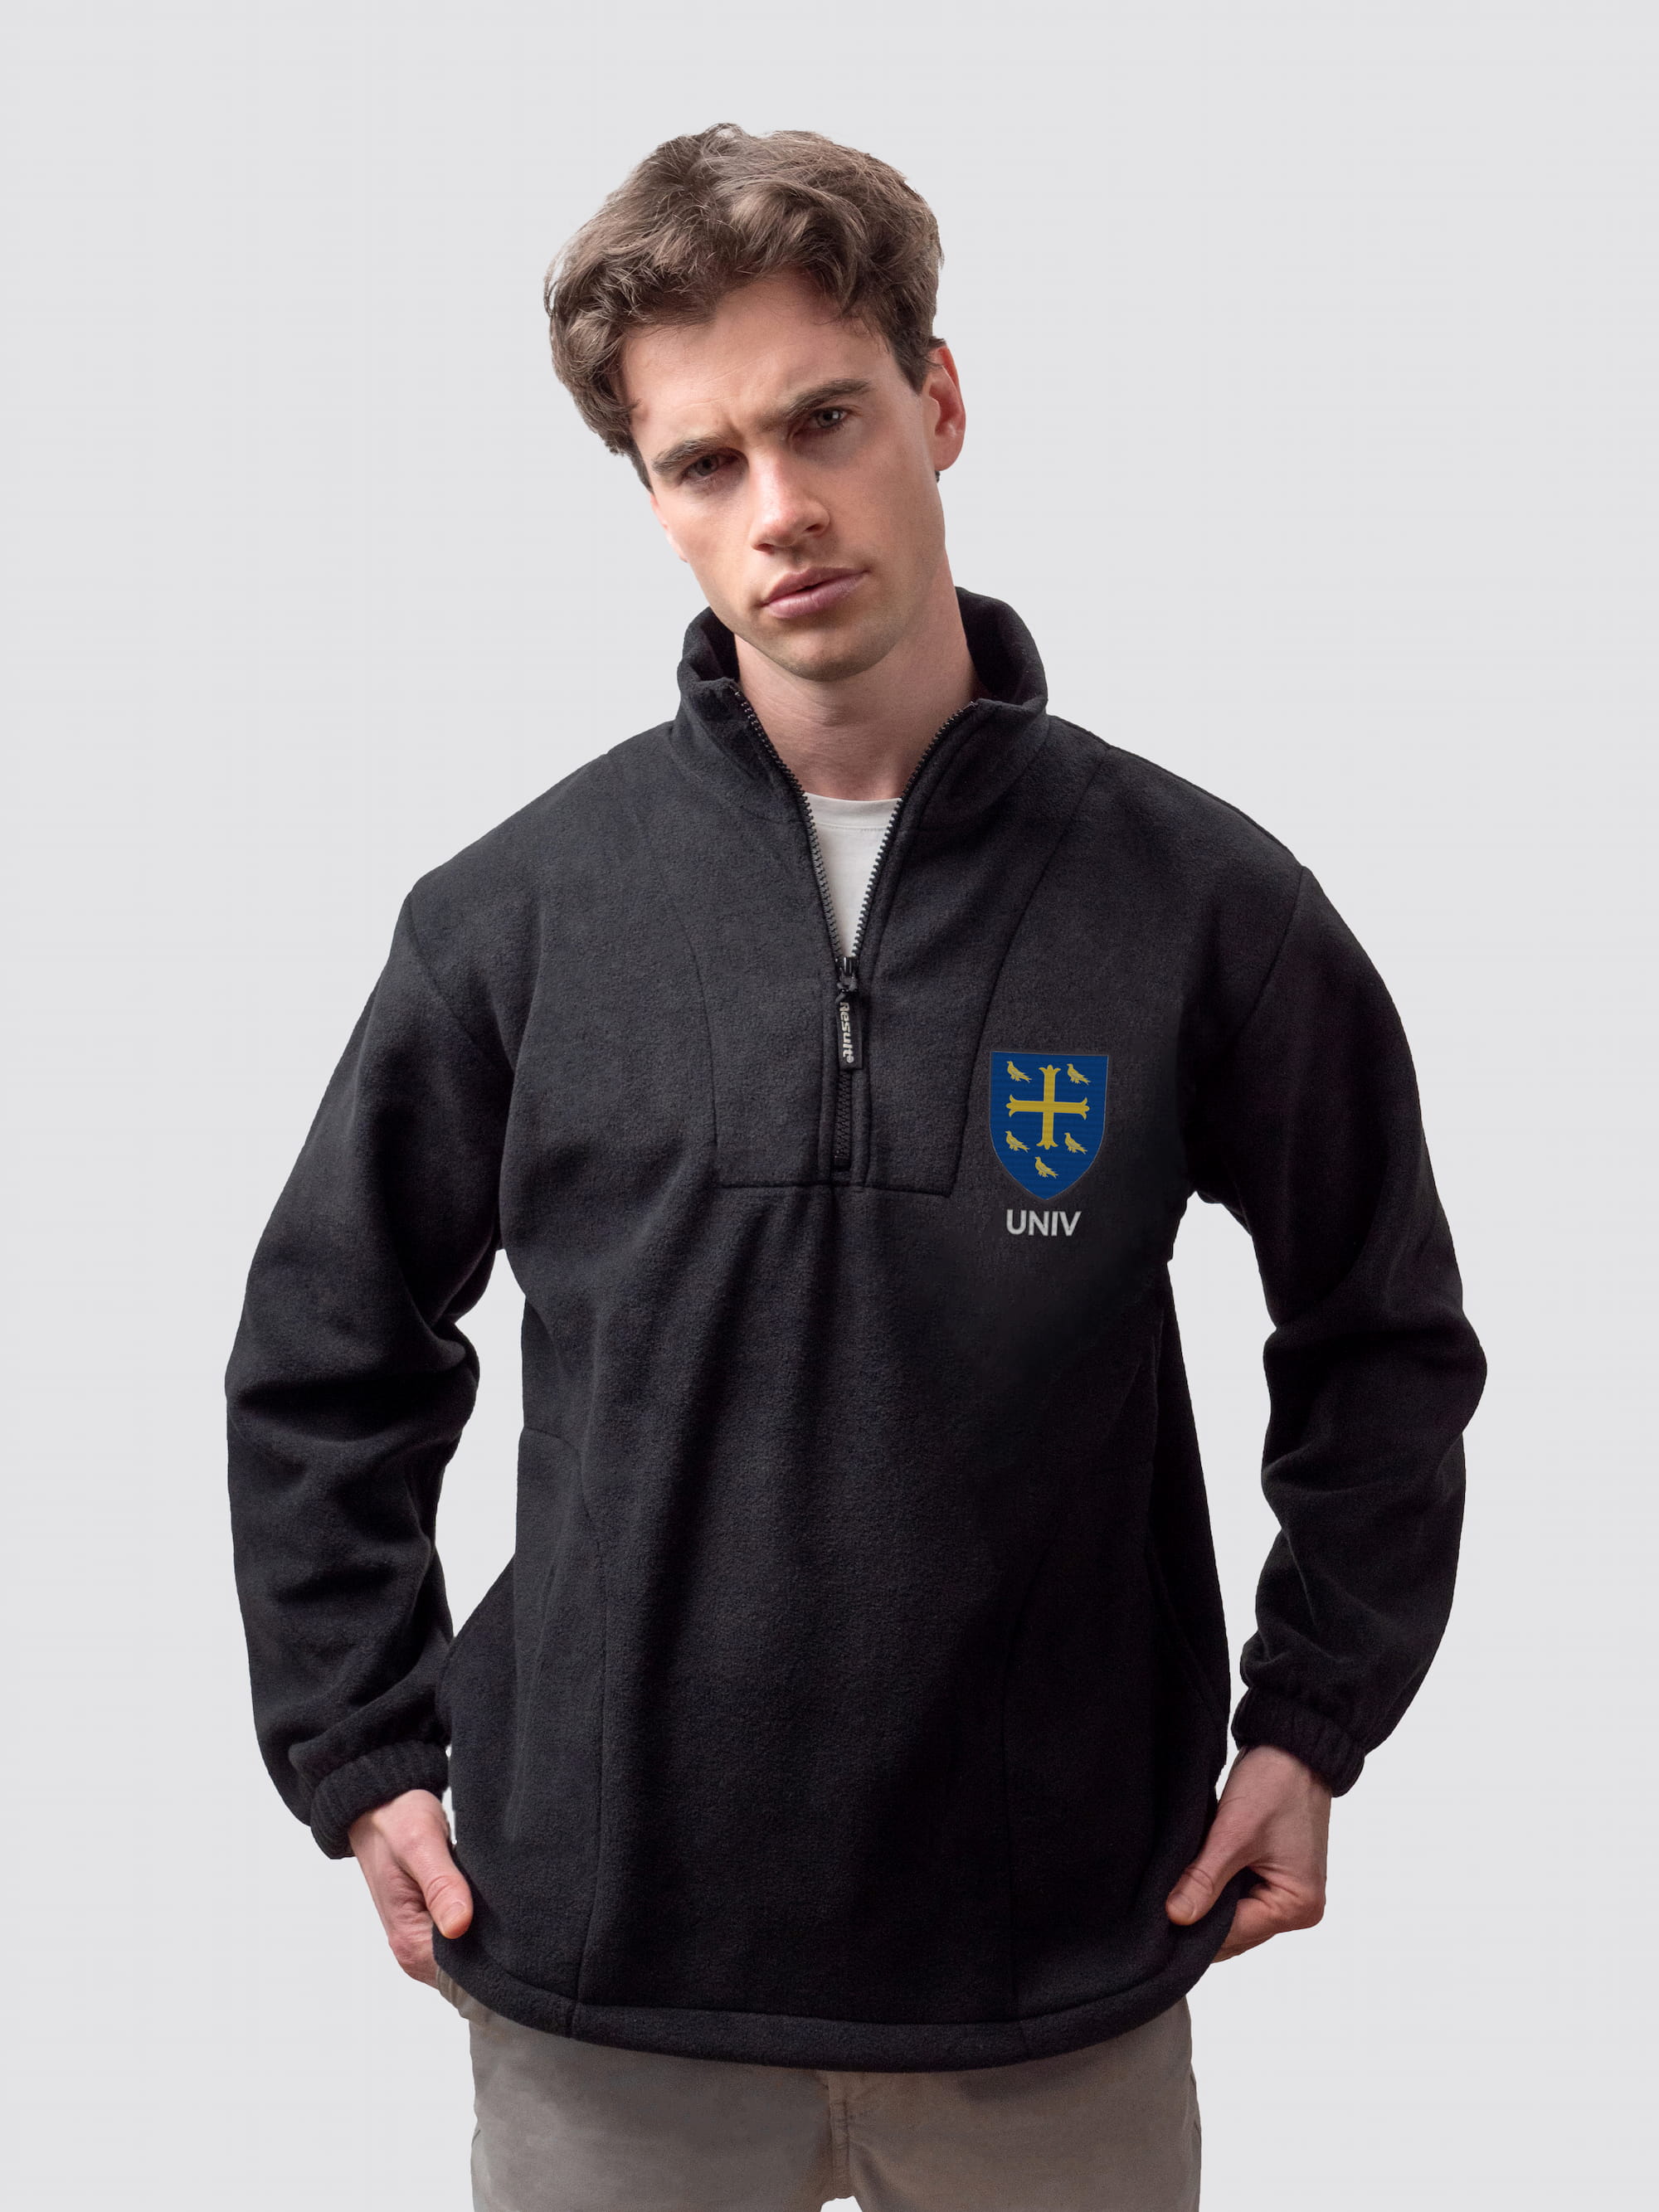 Oxford university fleece, with custom embroidered initials and University crest